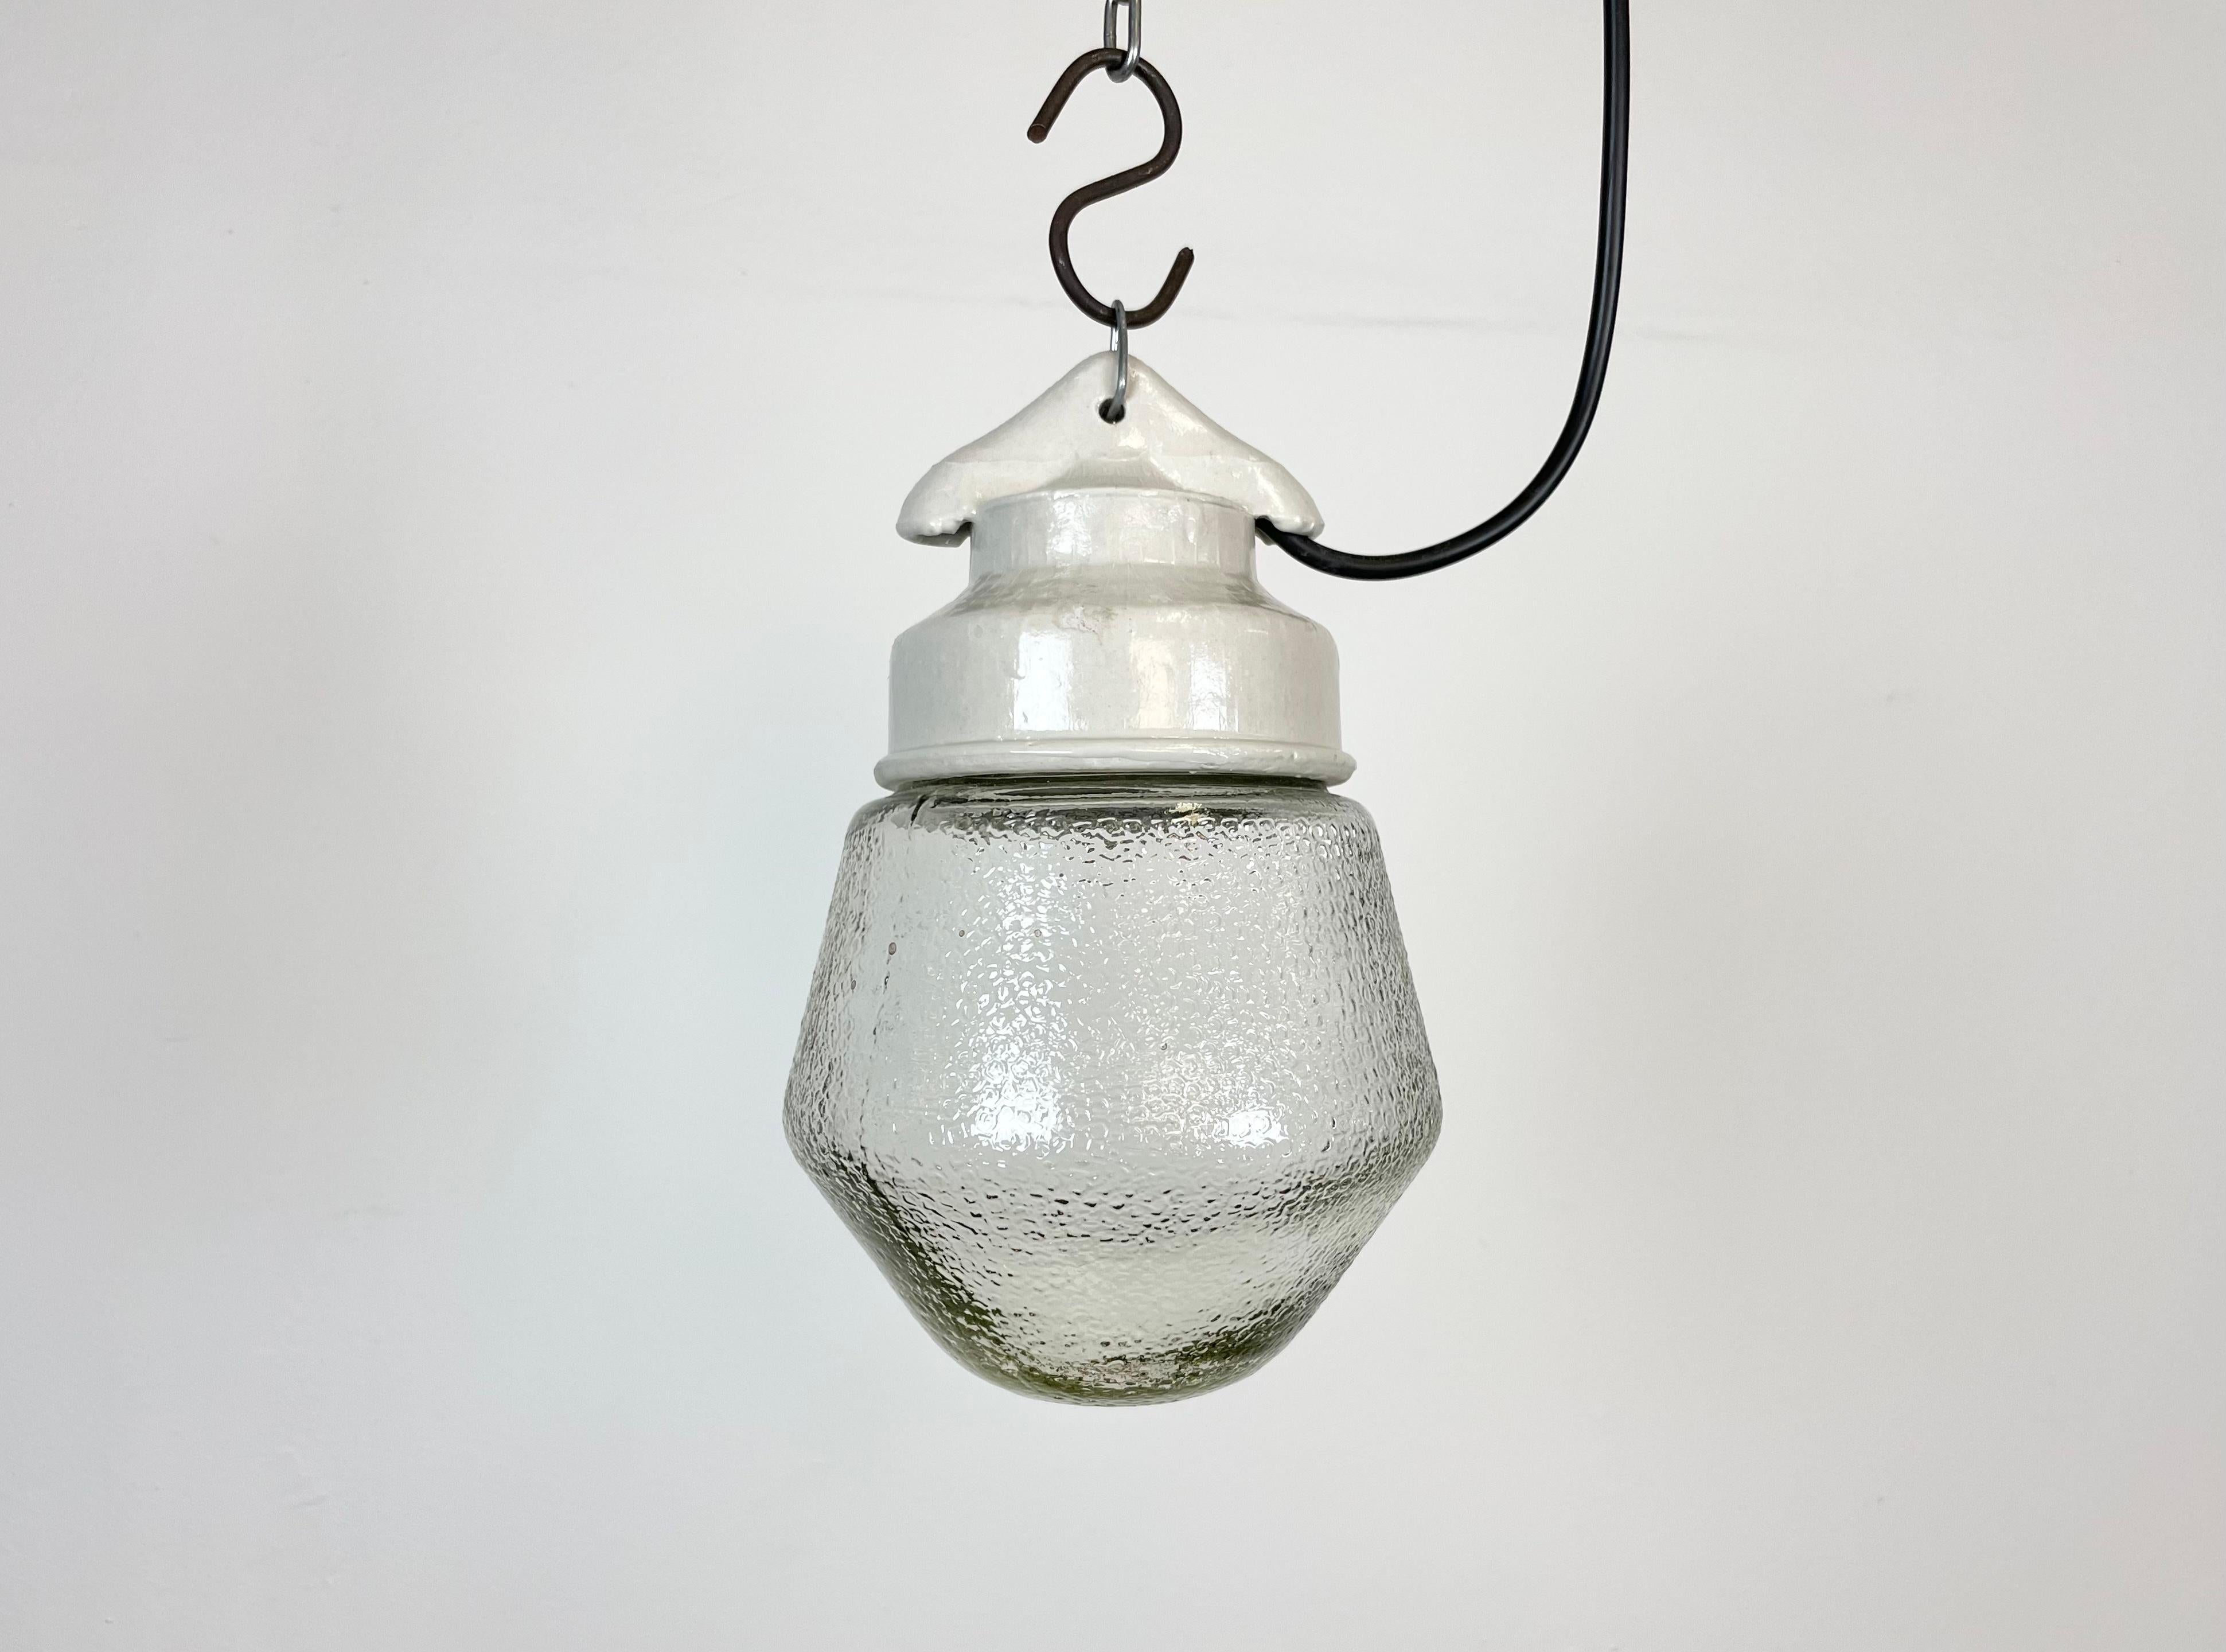 Vintage industrial light made in former Soviet Union during the 1970s.It features white porcelain top and frosted clear glass cover. The socket requires E27 light bulbs. New wire. The weight of the lamp is 1kg.